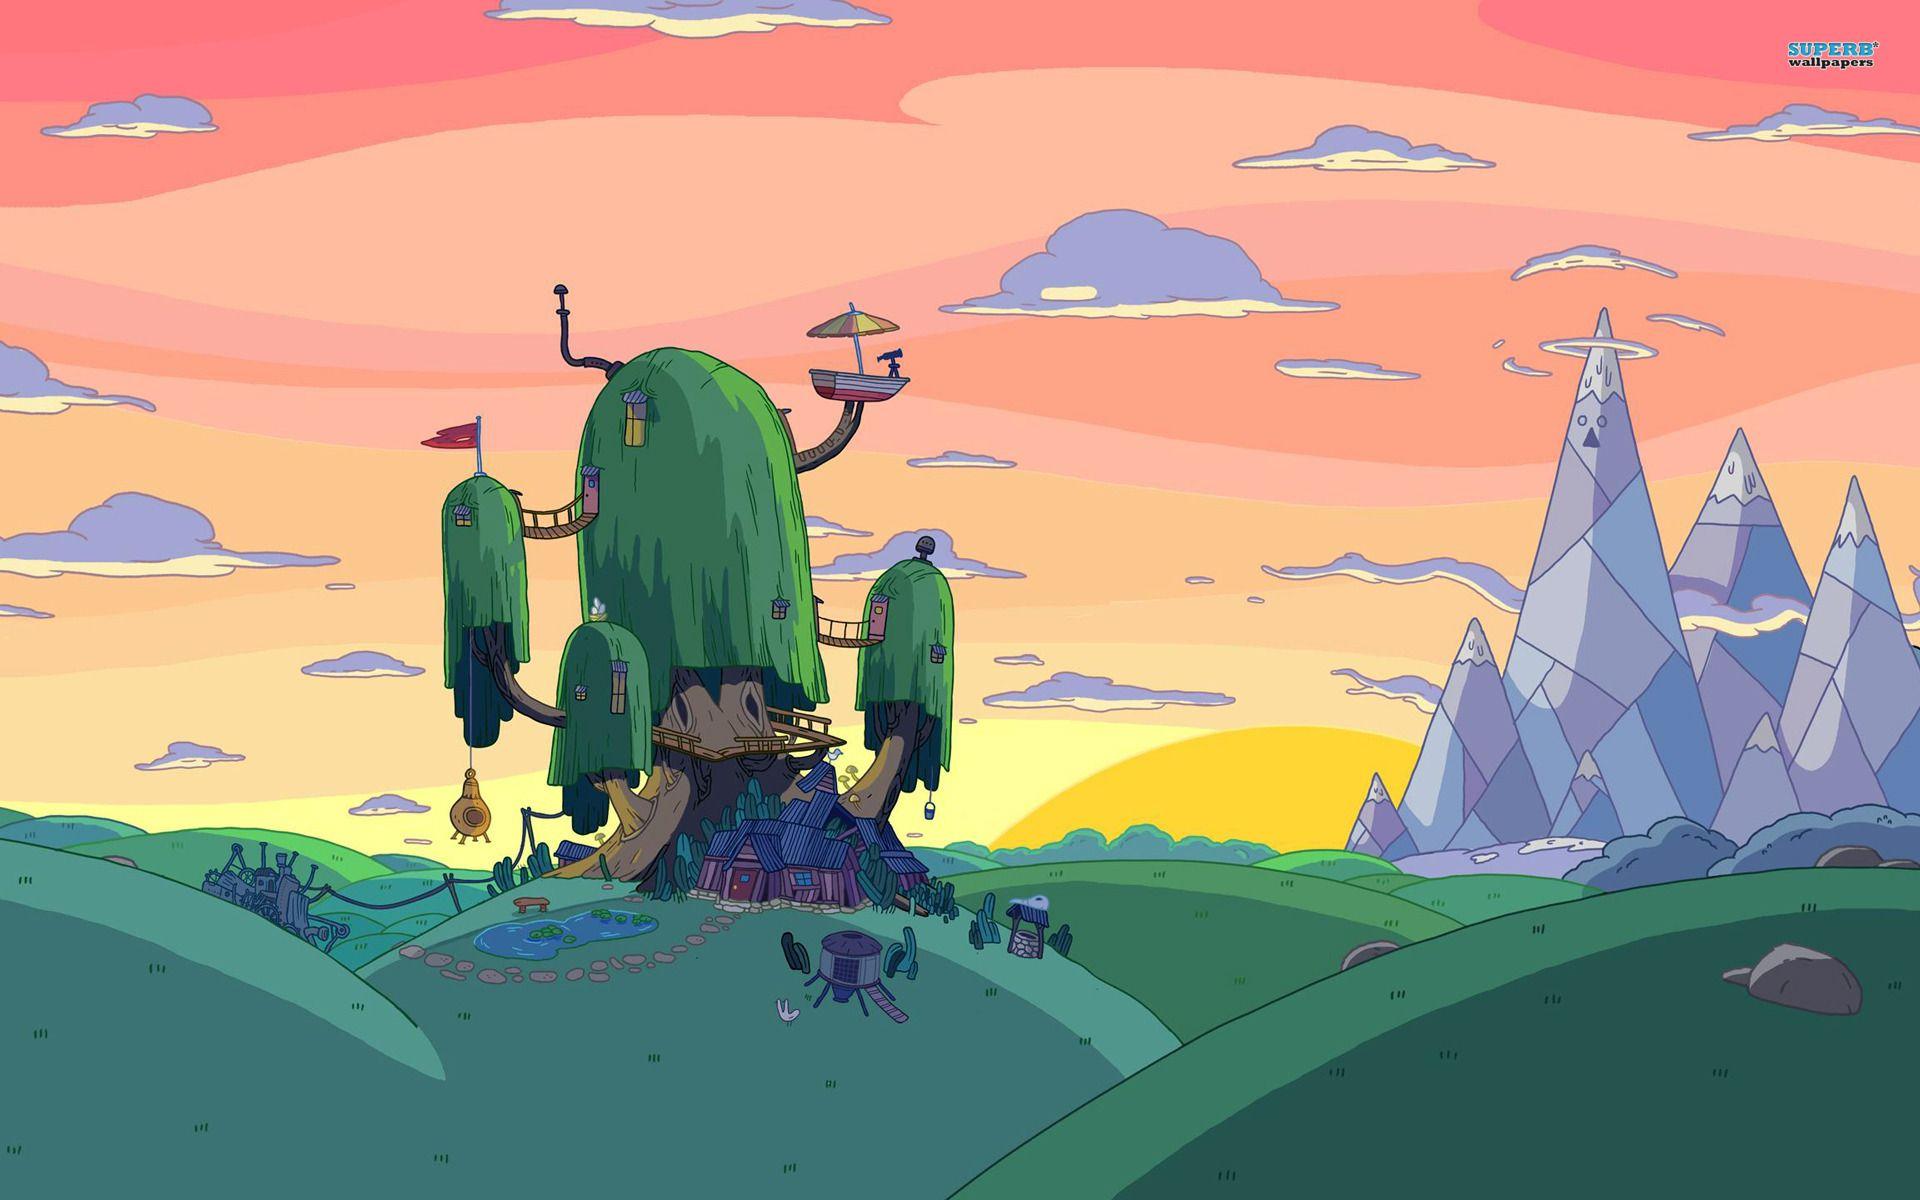 Adventure Time Landscape Wallpapers - Top Free Adventure Time Landscape